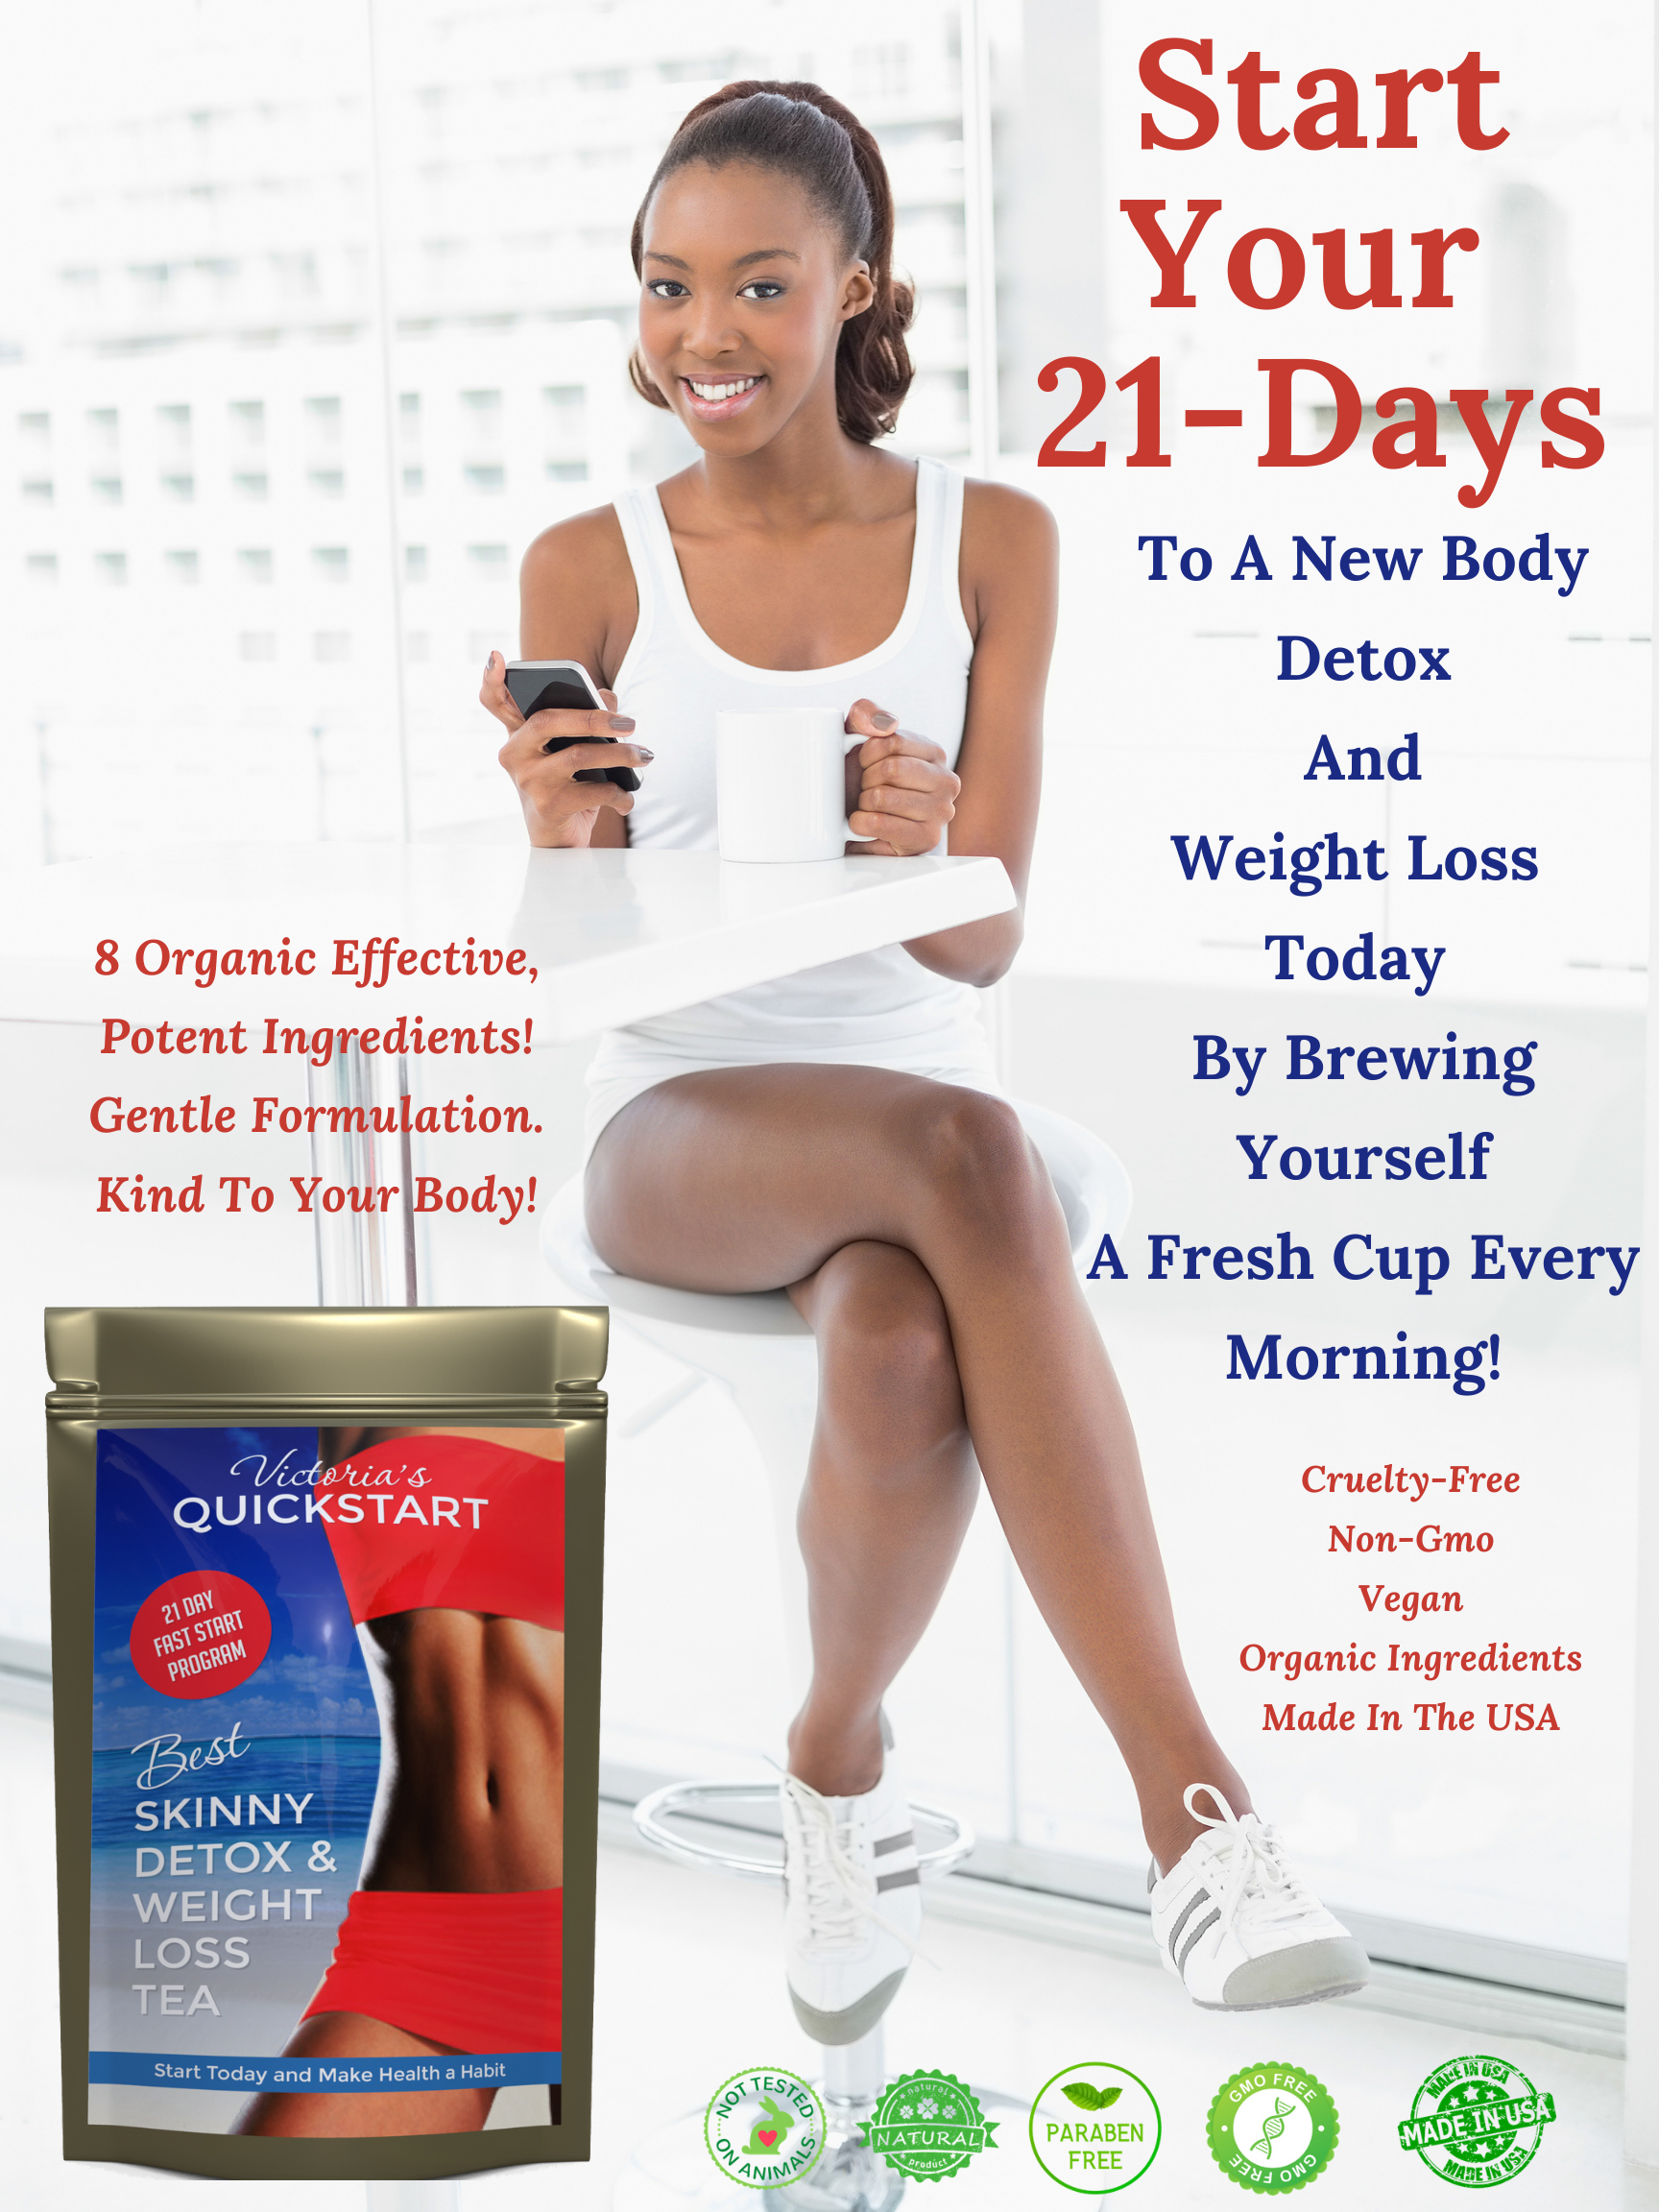 Lose Up To 7 Pounds In 7 Days